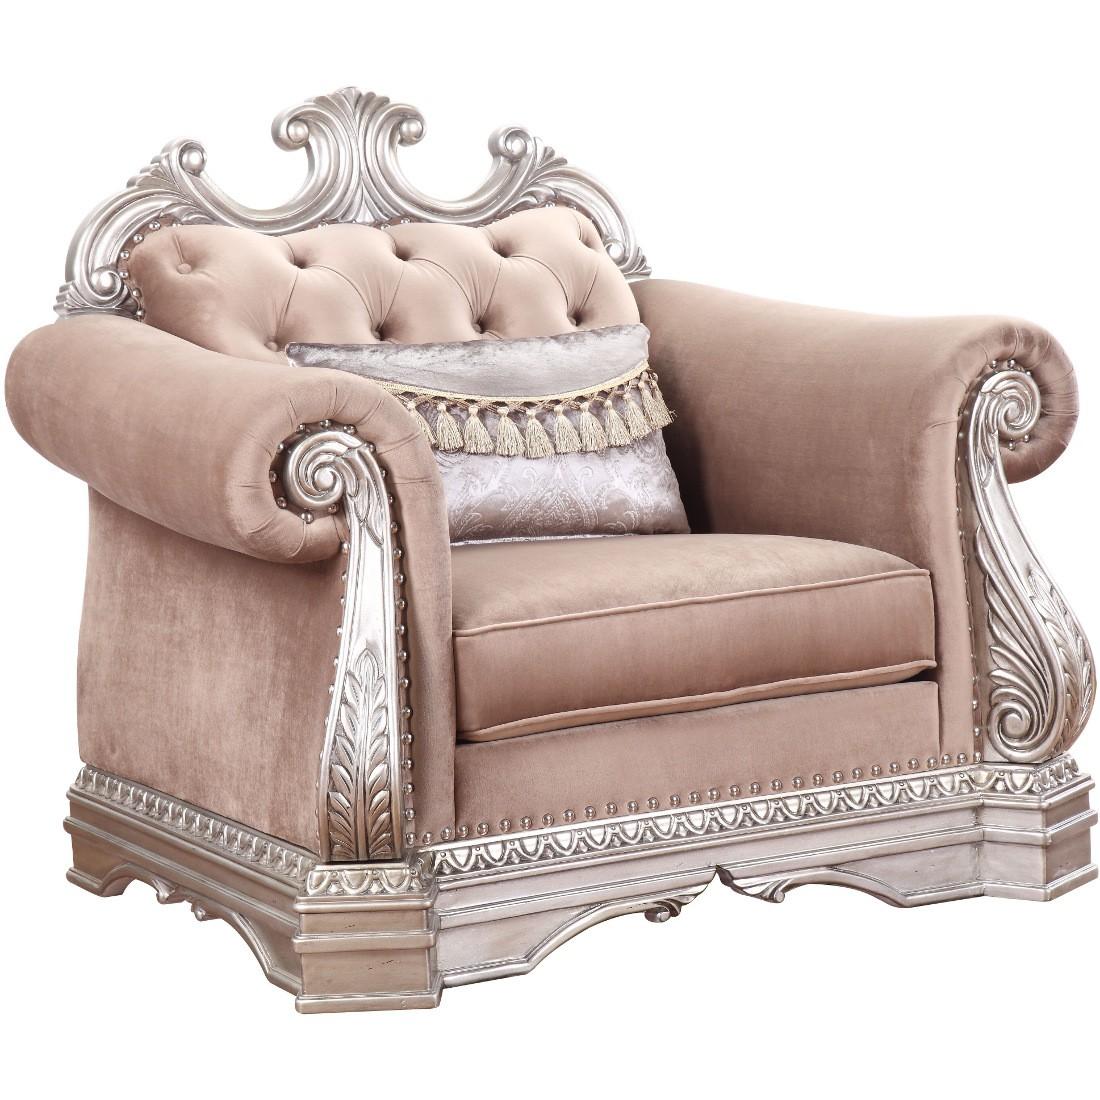 Classic, Traditional Armchair Northville-56932 Northville-56932 in Antique, Champagne Velvet